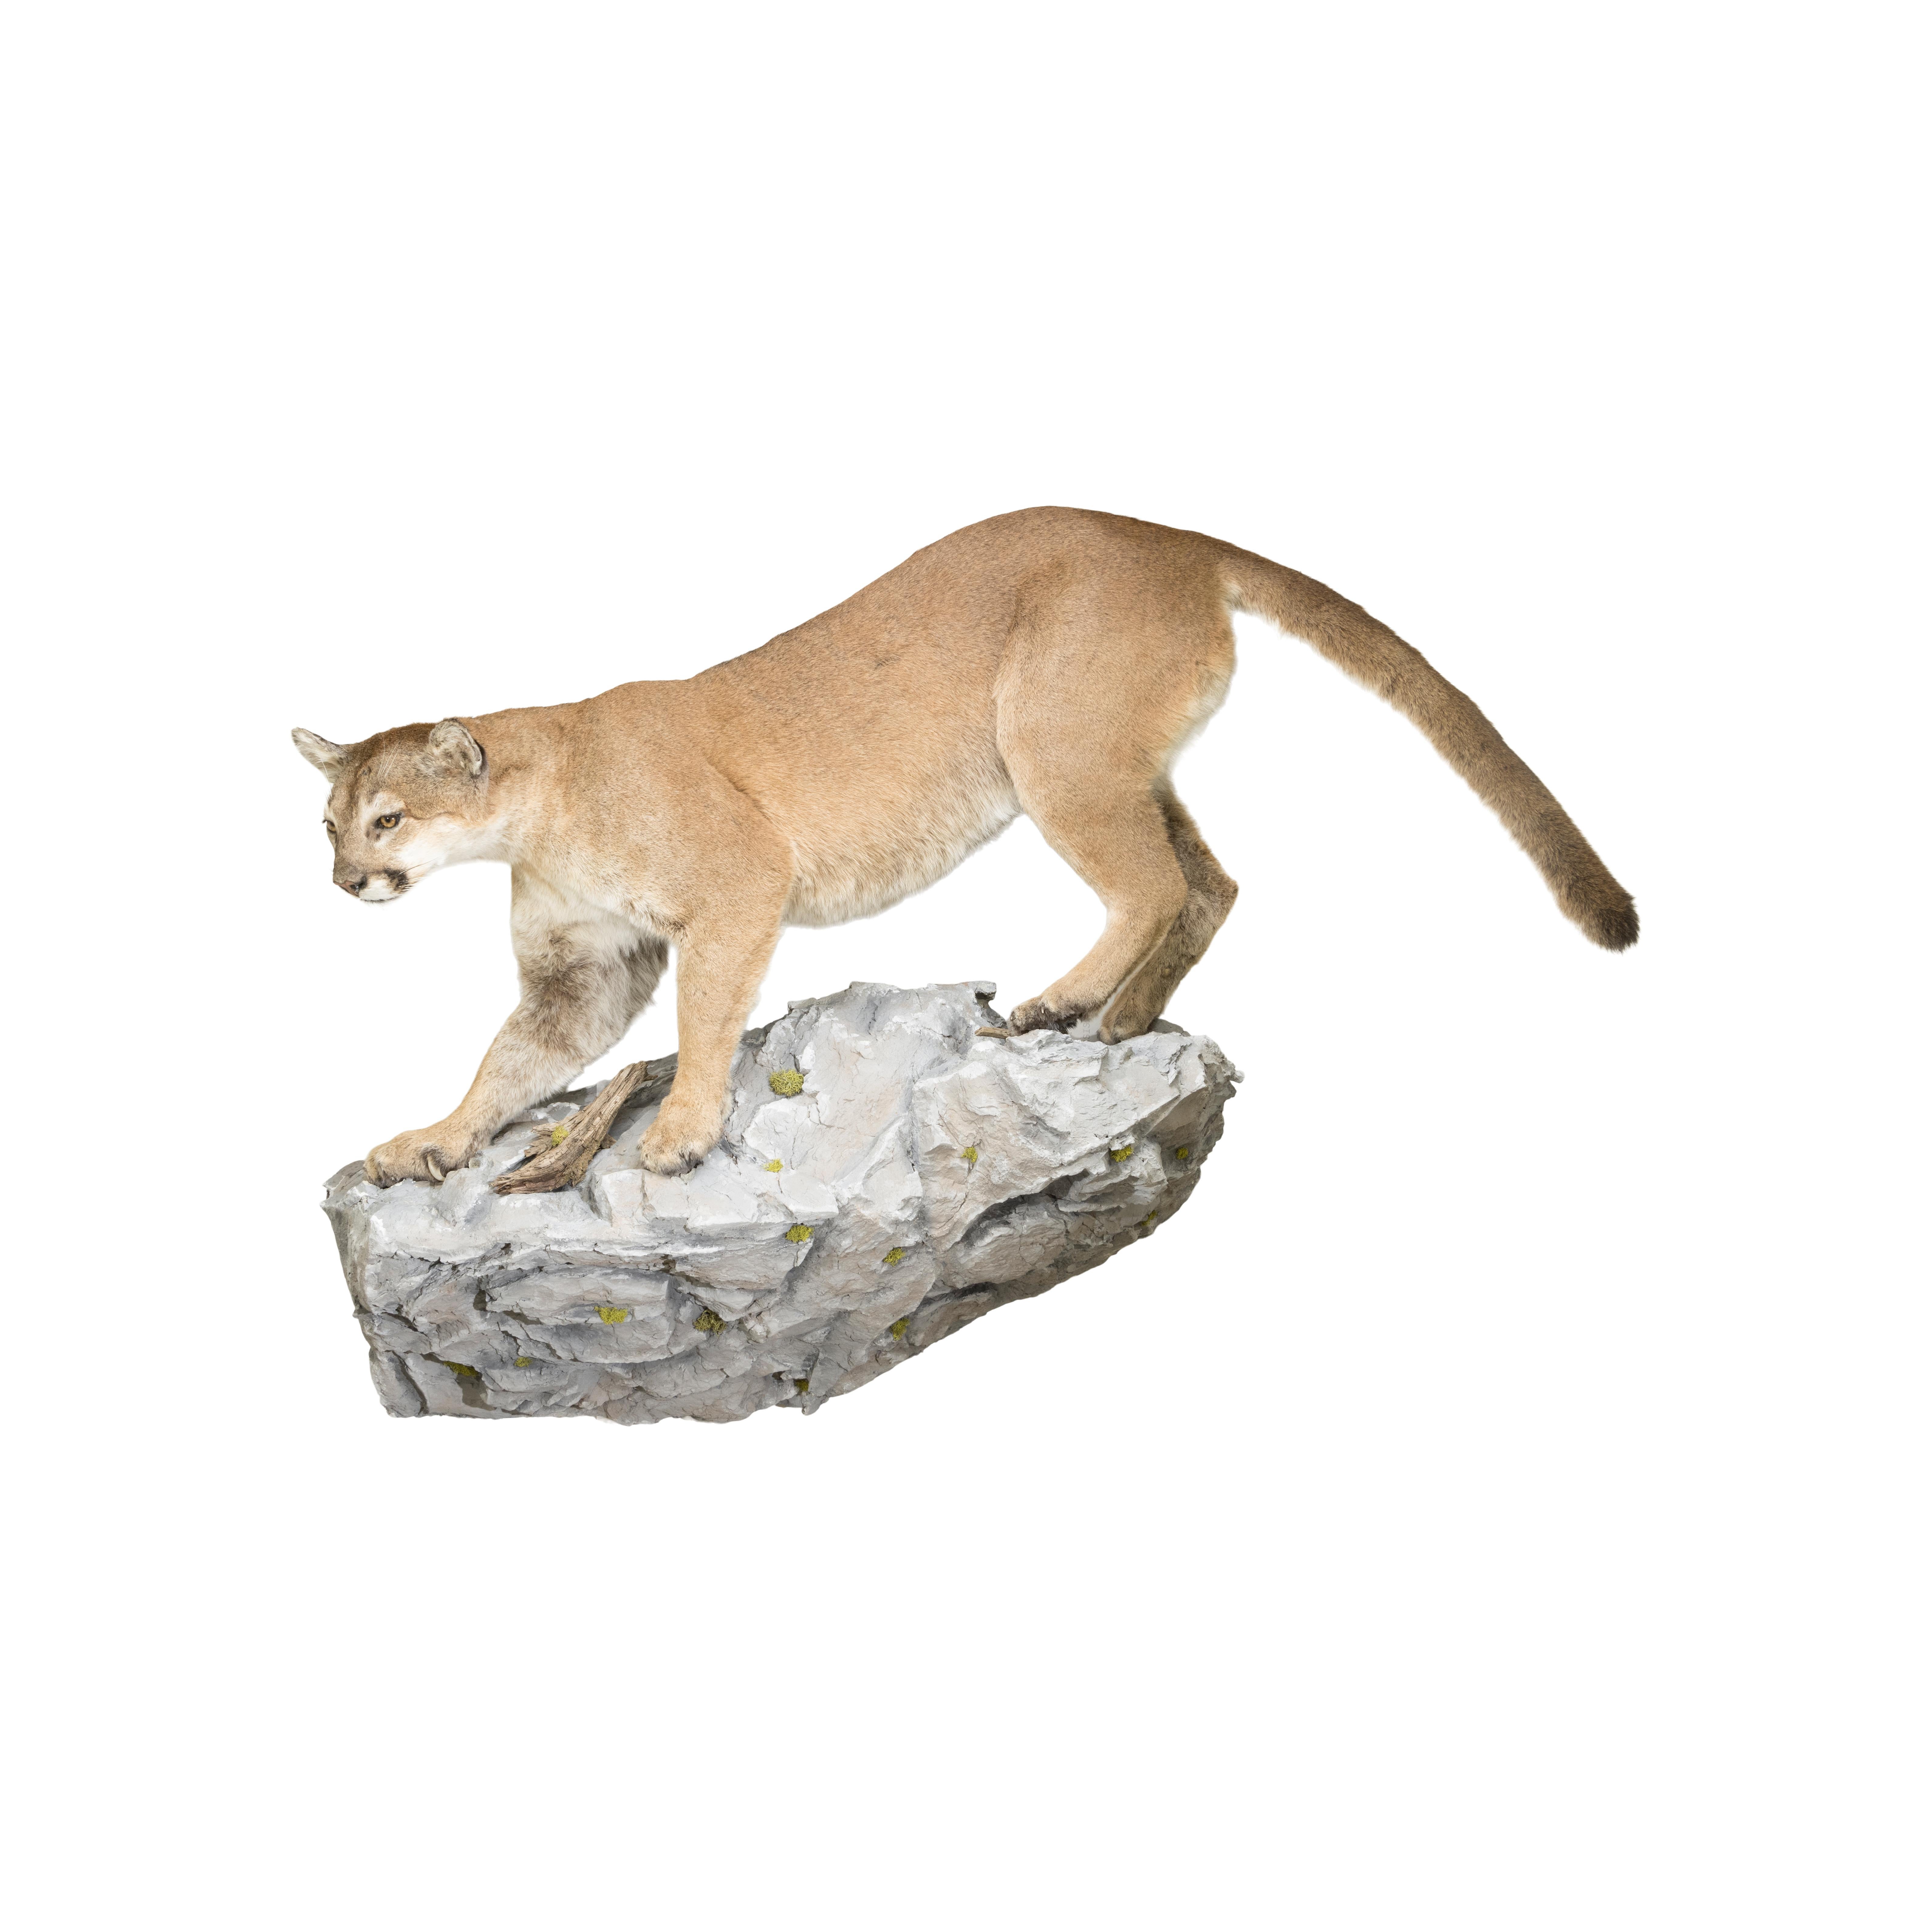 Huge Idaho Cougar Taxidermy Mount on Base For Sale 1